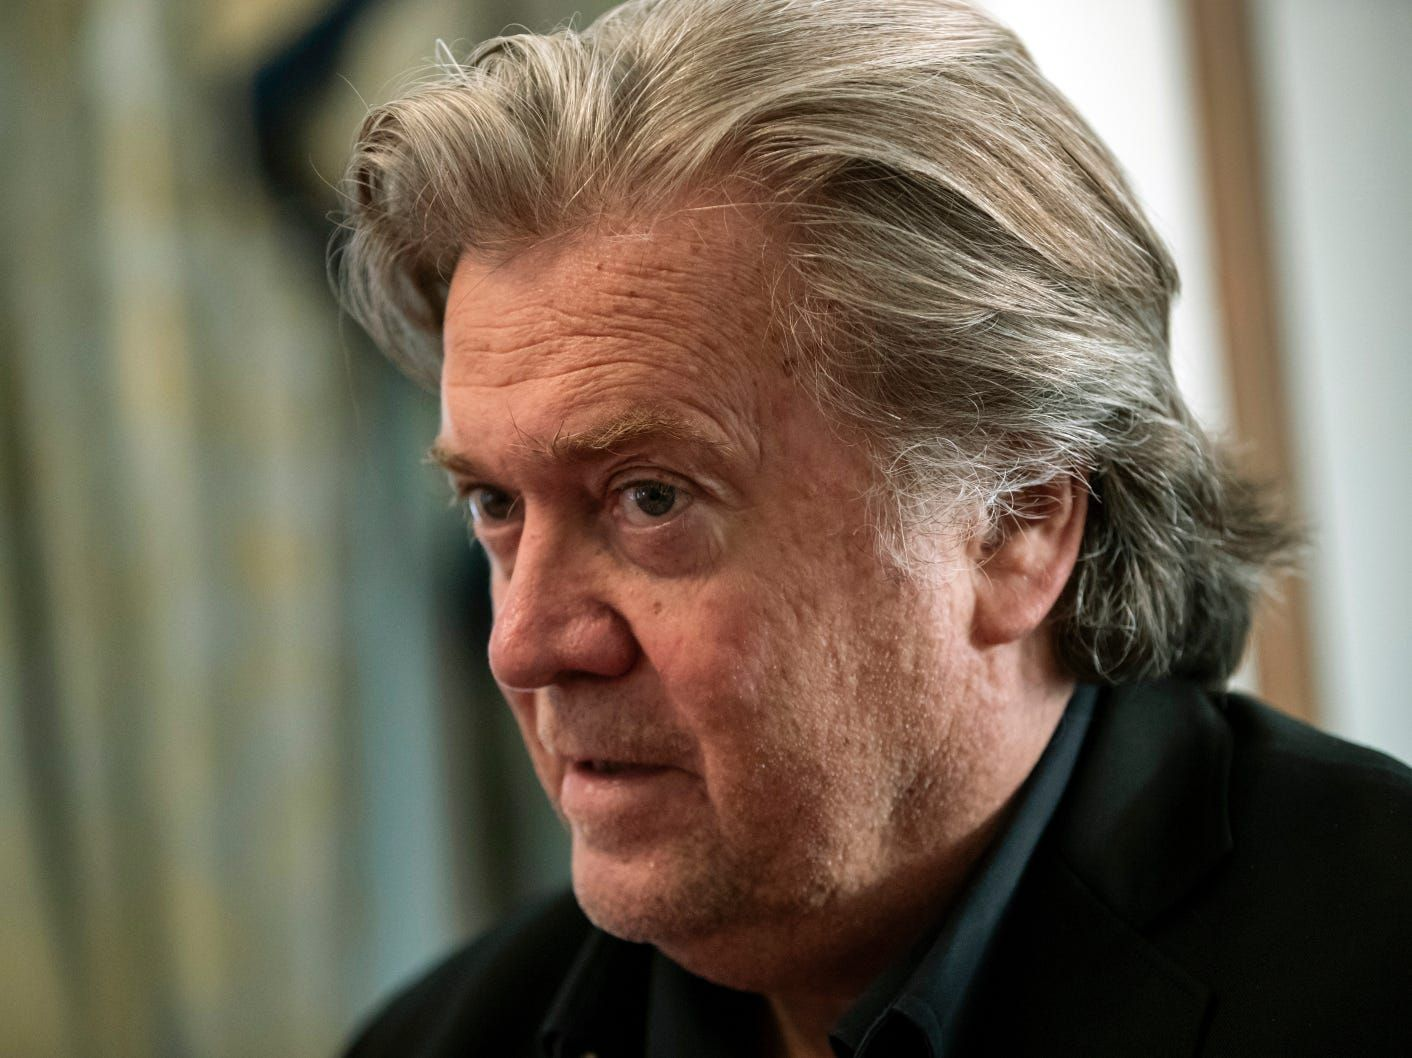 A Chinese virologist claimed the coronavirus was 'intentionally' released. Turns out, she works for a group led by Steve Bannon.